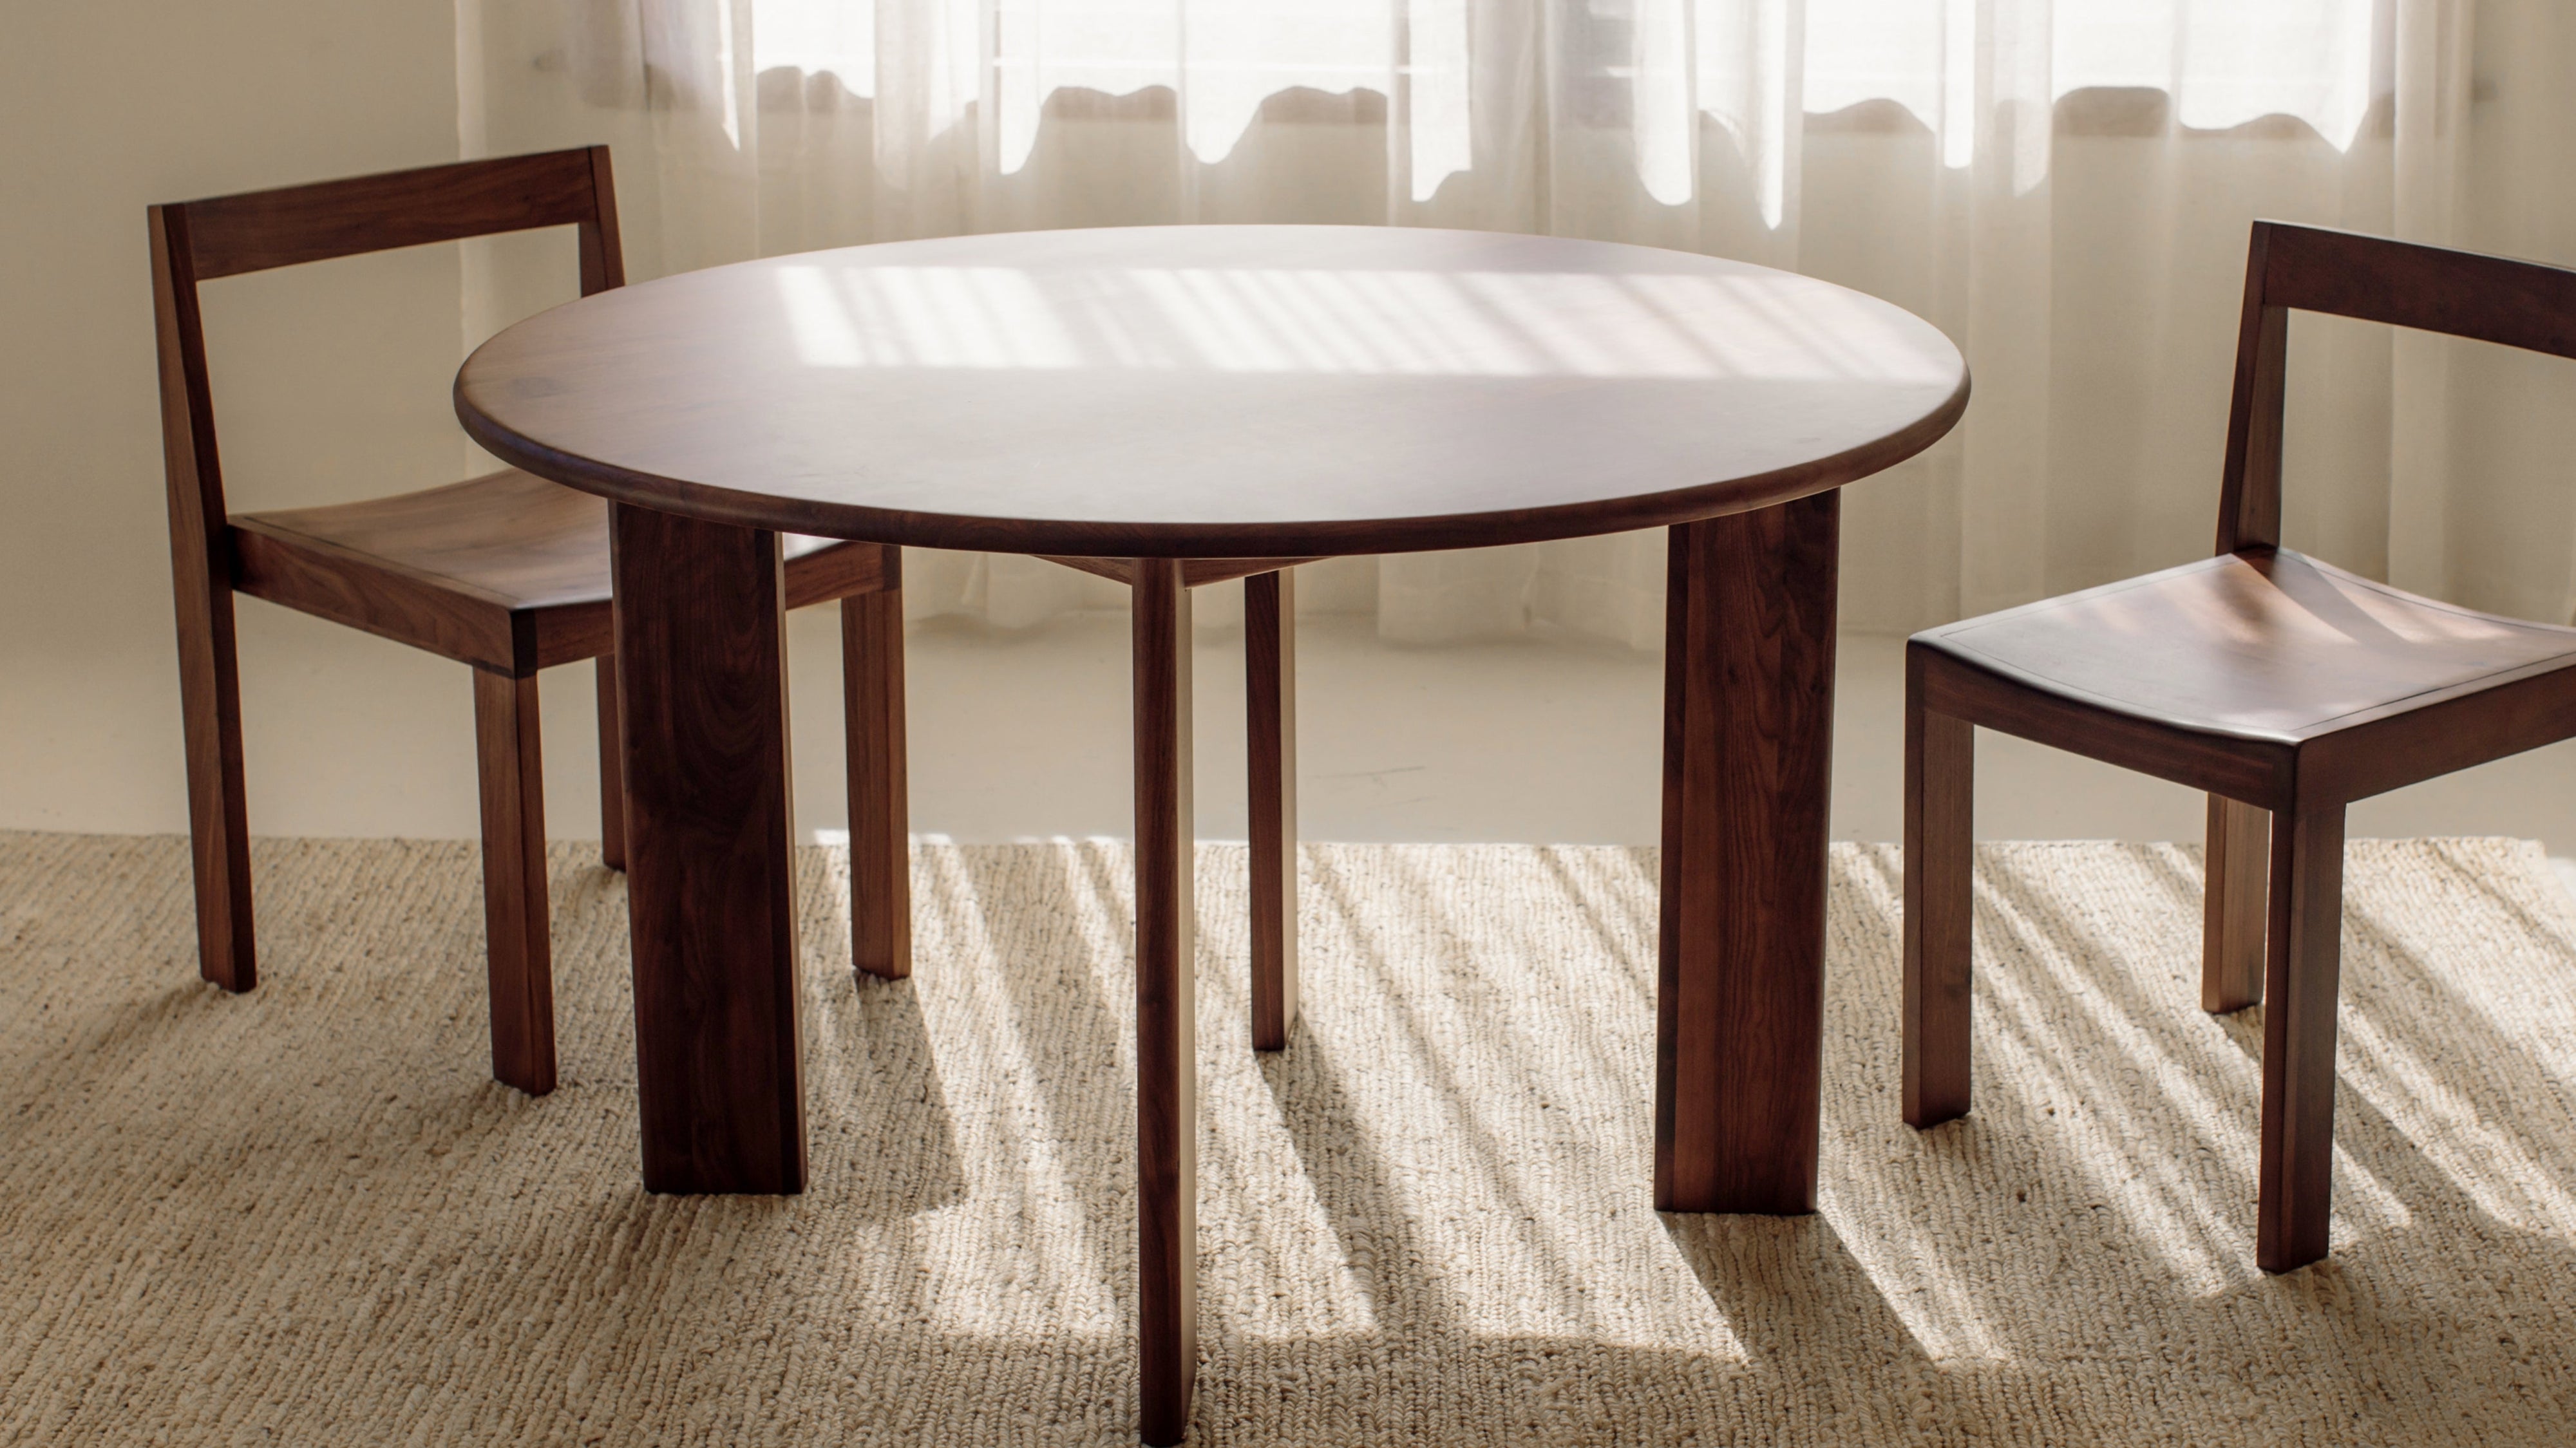 Frame Round Dining Table, Seats 4-5 People, Walnut - Image 3